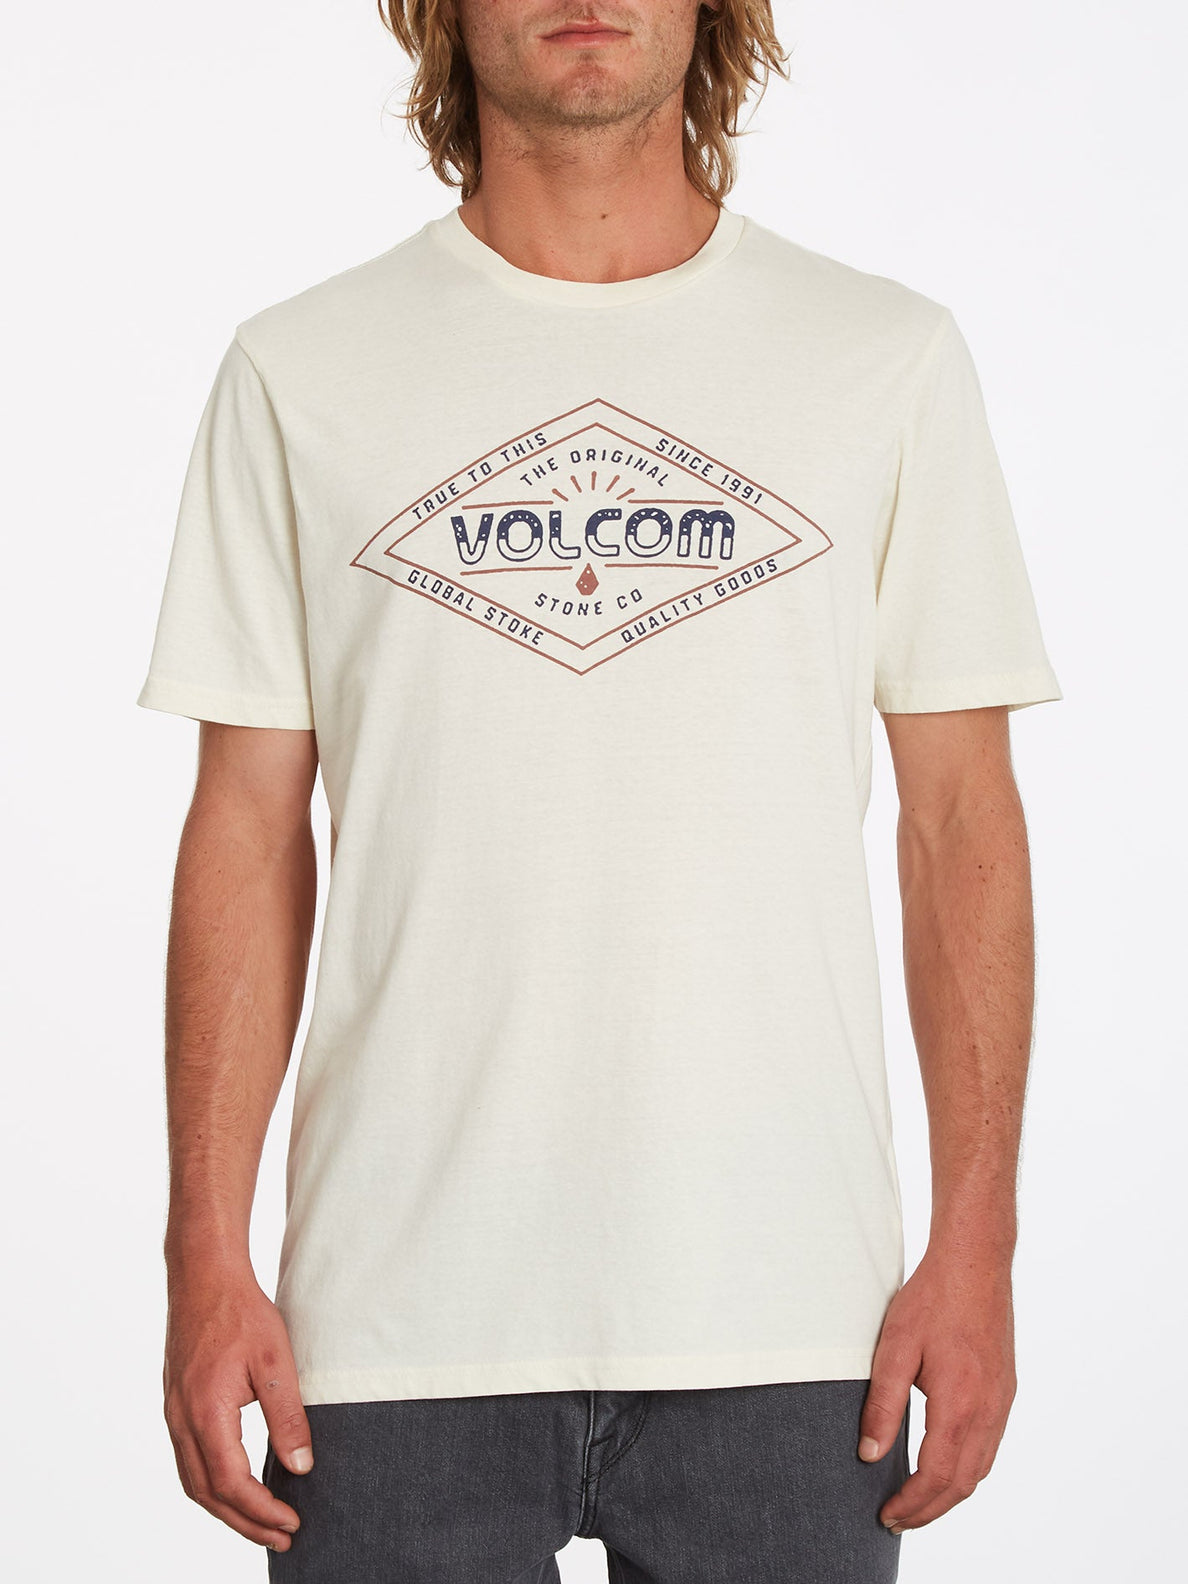 Hikendo T-shirt - OFF WHITE (A5032206_OFW) [F]